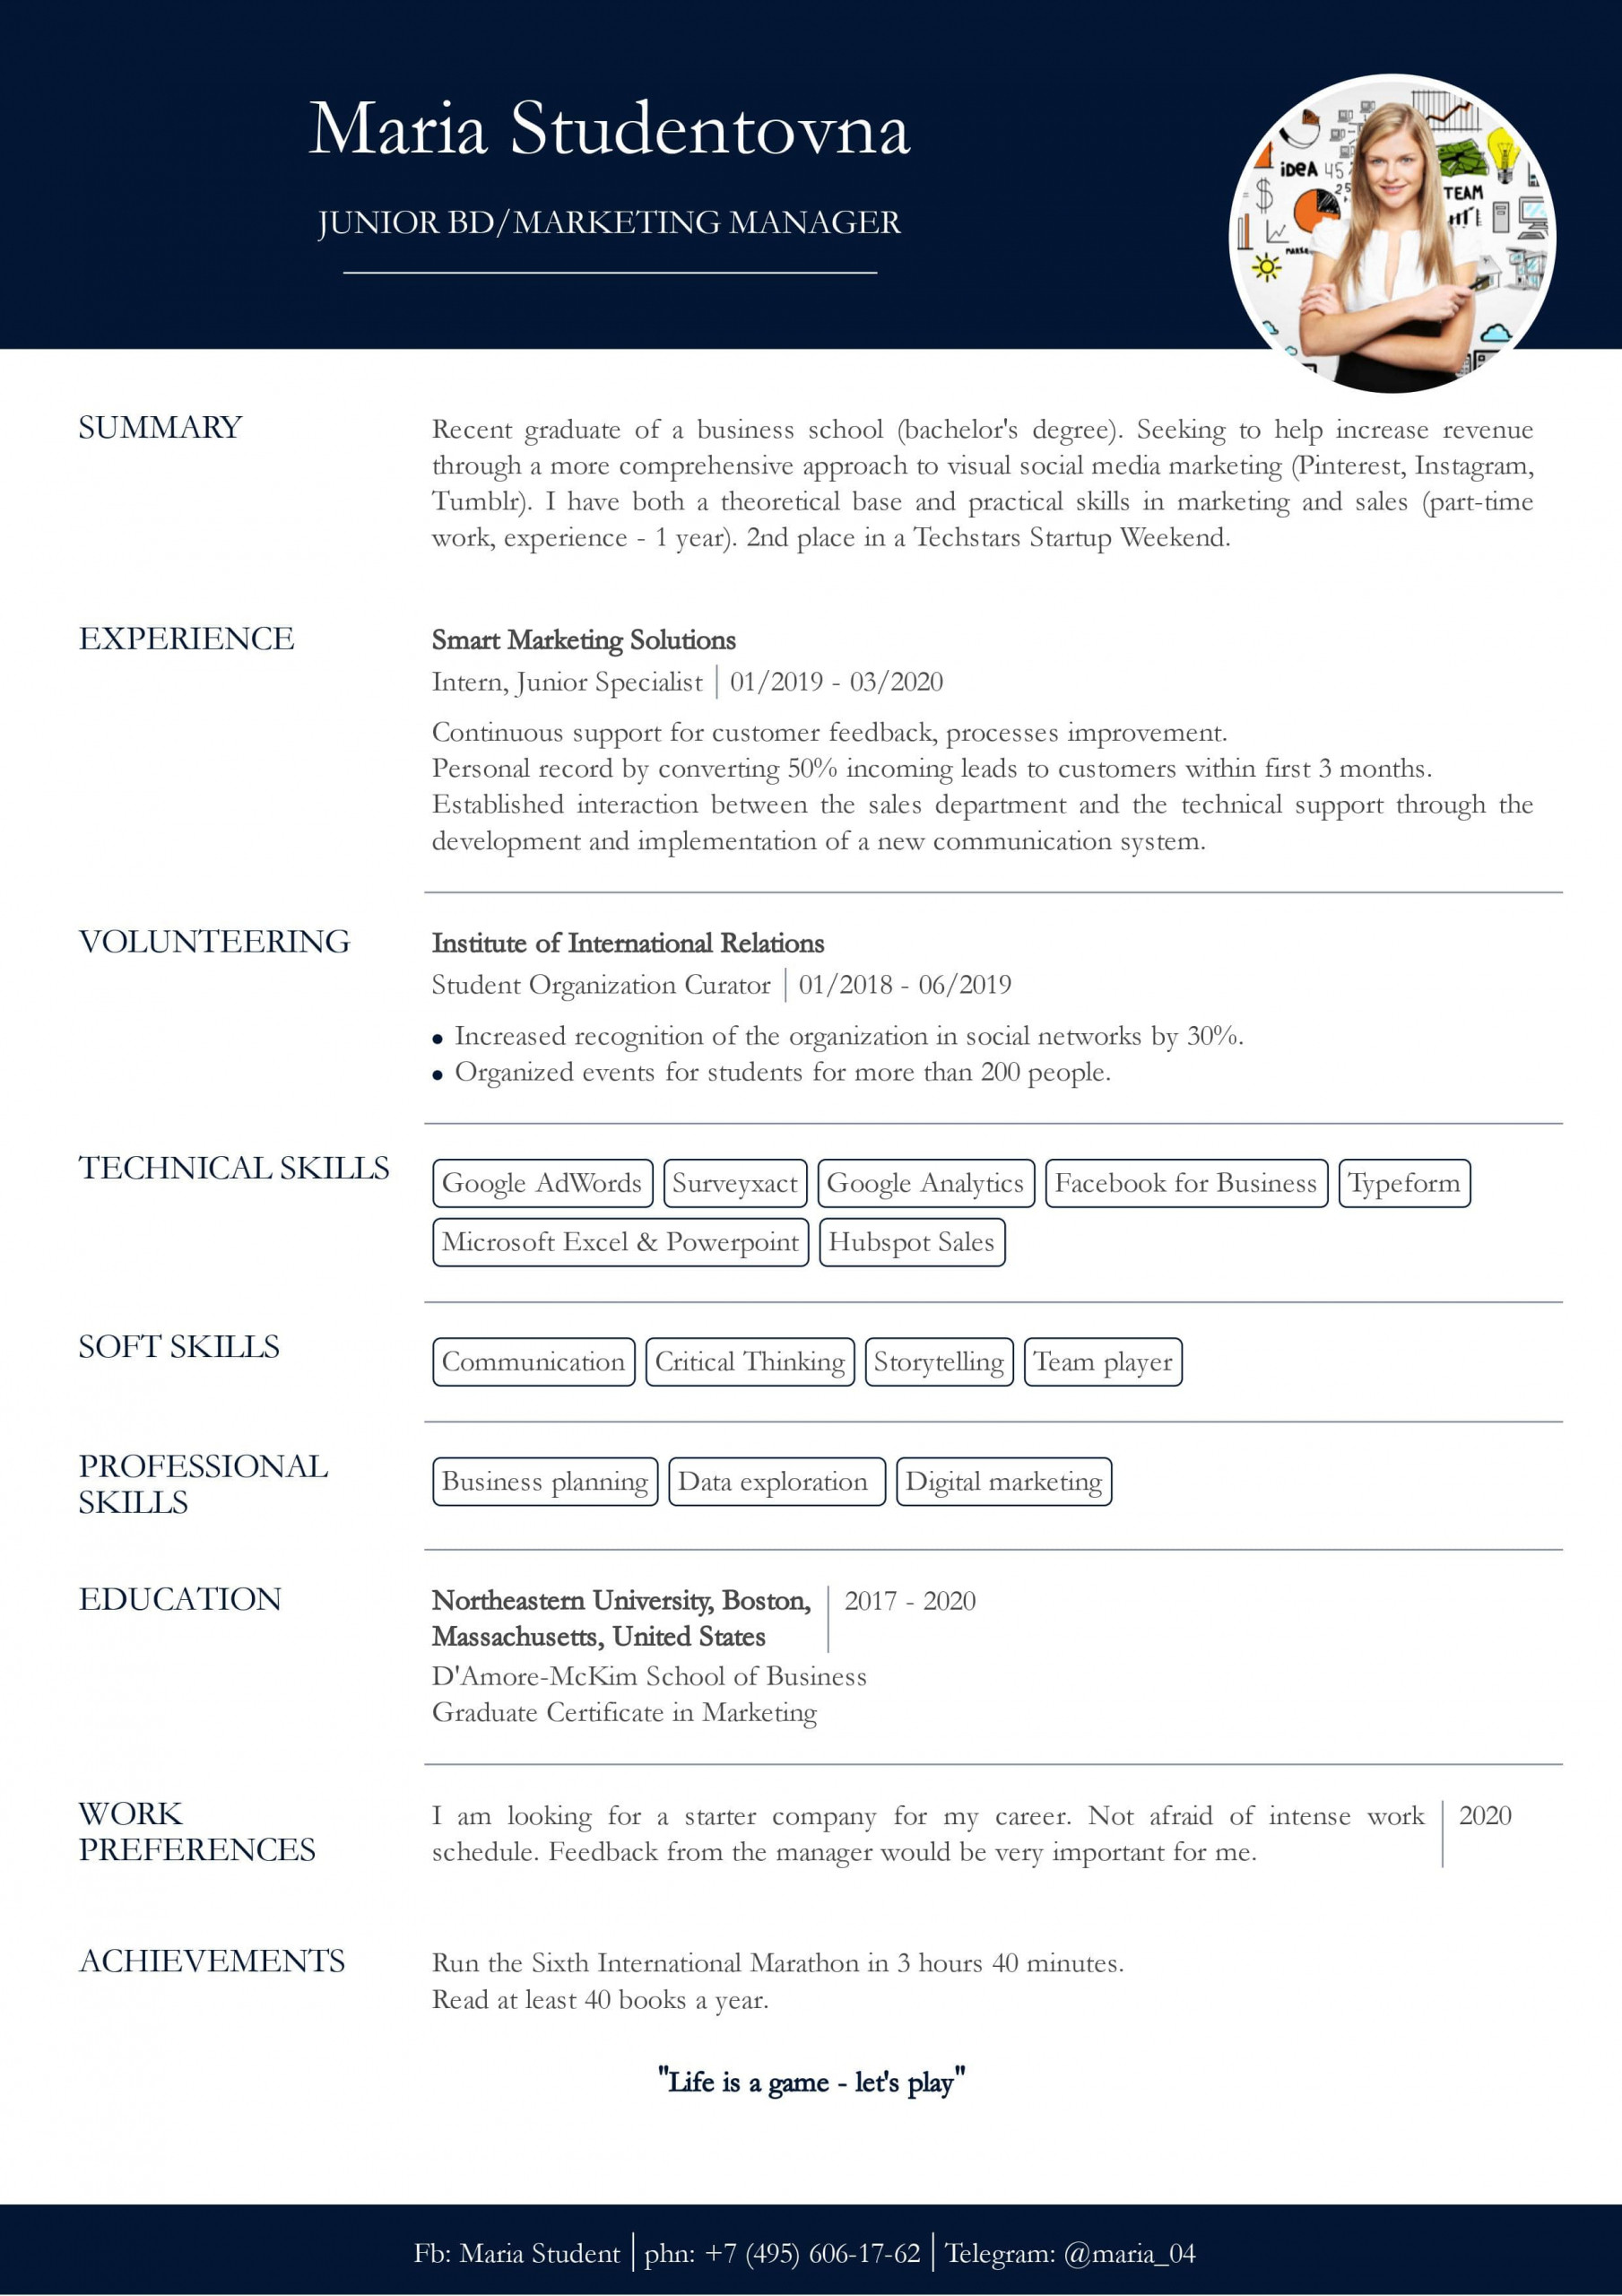 Resume for Students with No Work Experience Template Resume with No Work Experience. Sample for Students. – Cv2you Blog